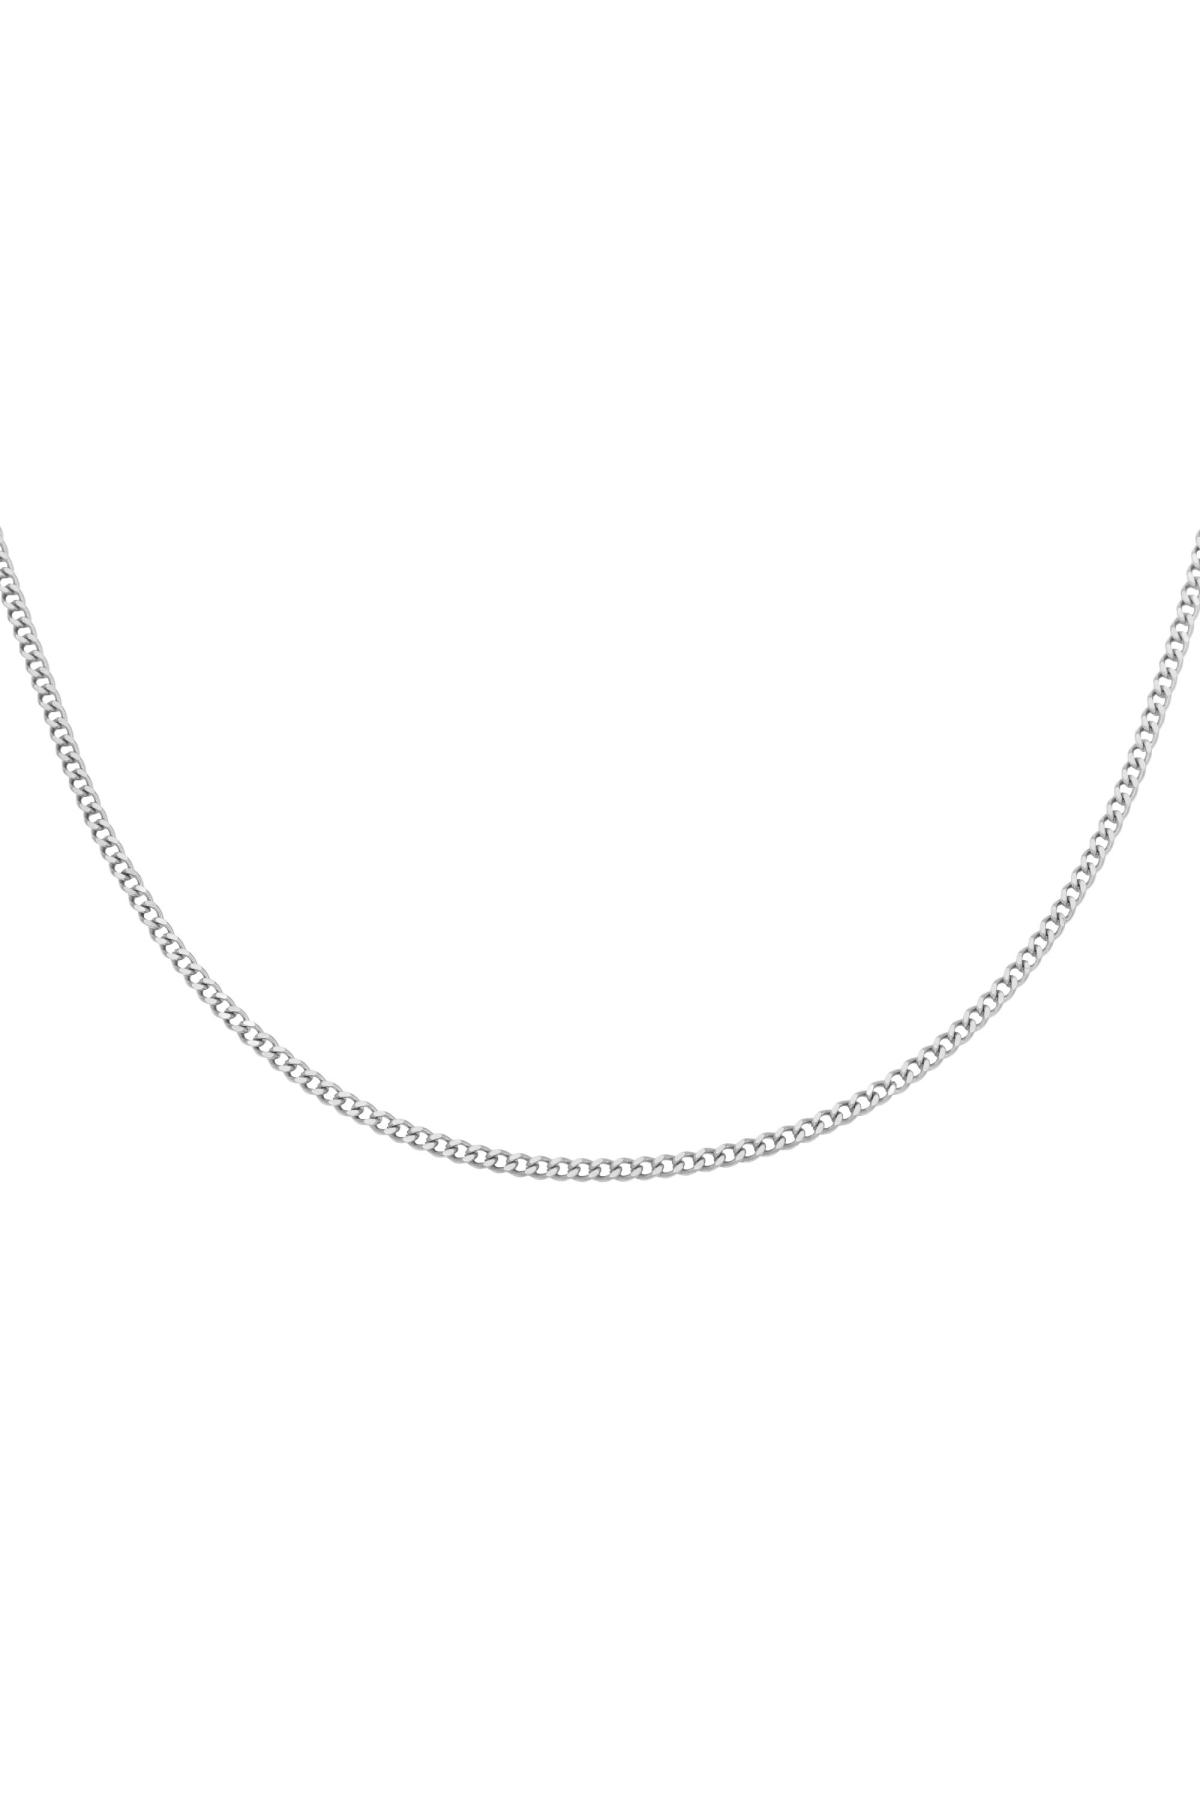 Silver / Necklace Tiny Plain Chains Silver Stainless Steel Picture2